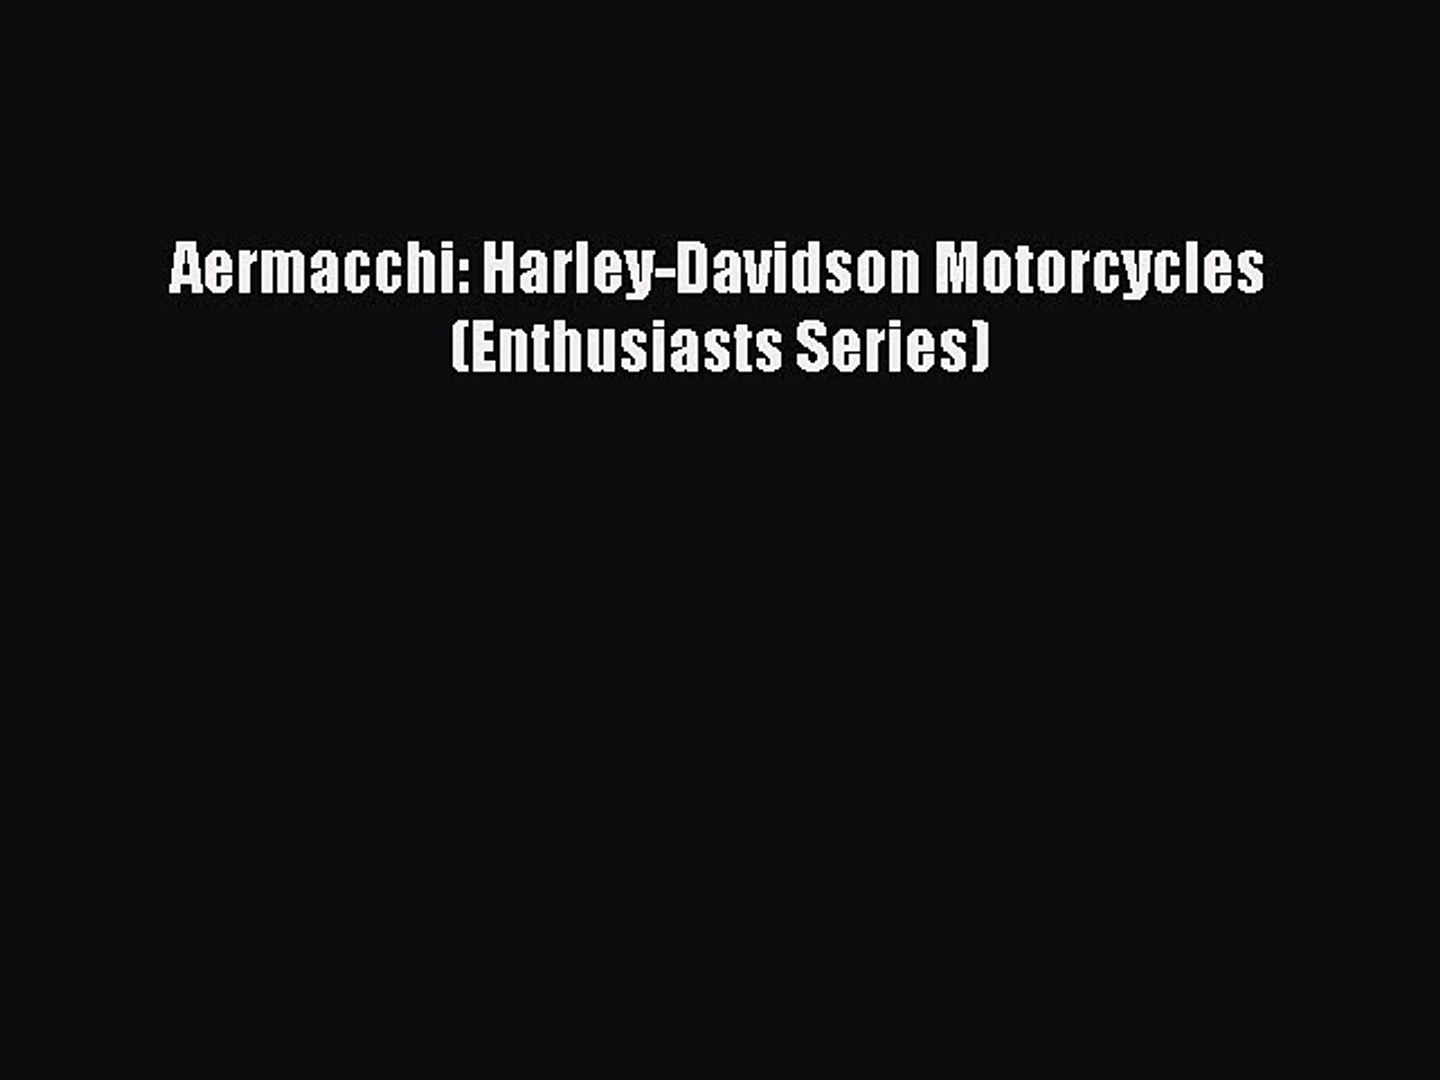 Book Aermacchi: Harley-Davidson Motorcycles (Enthusiasts Series) Read Full Ebook